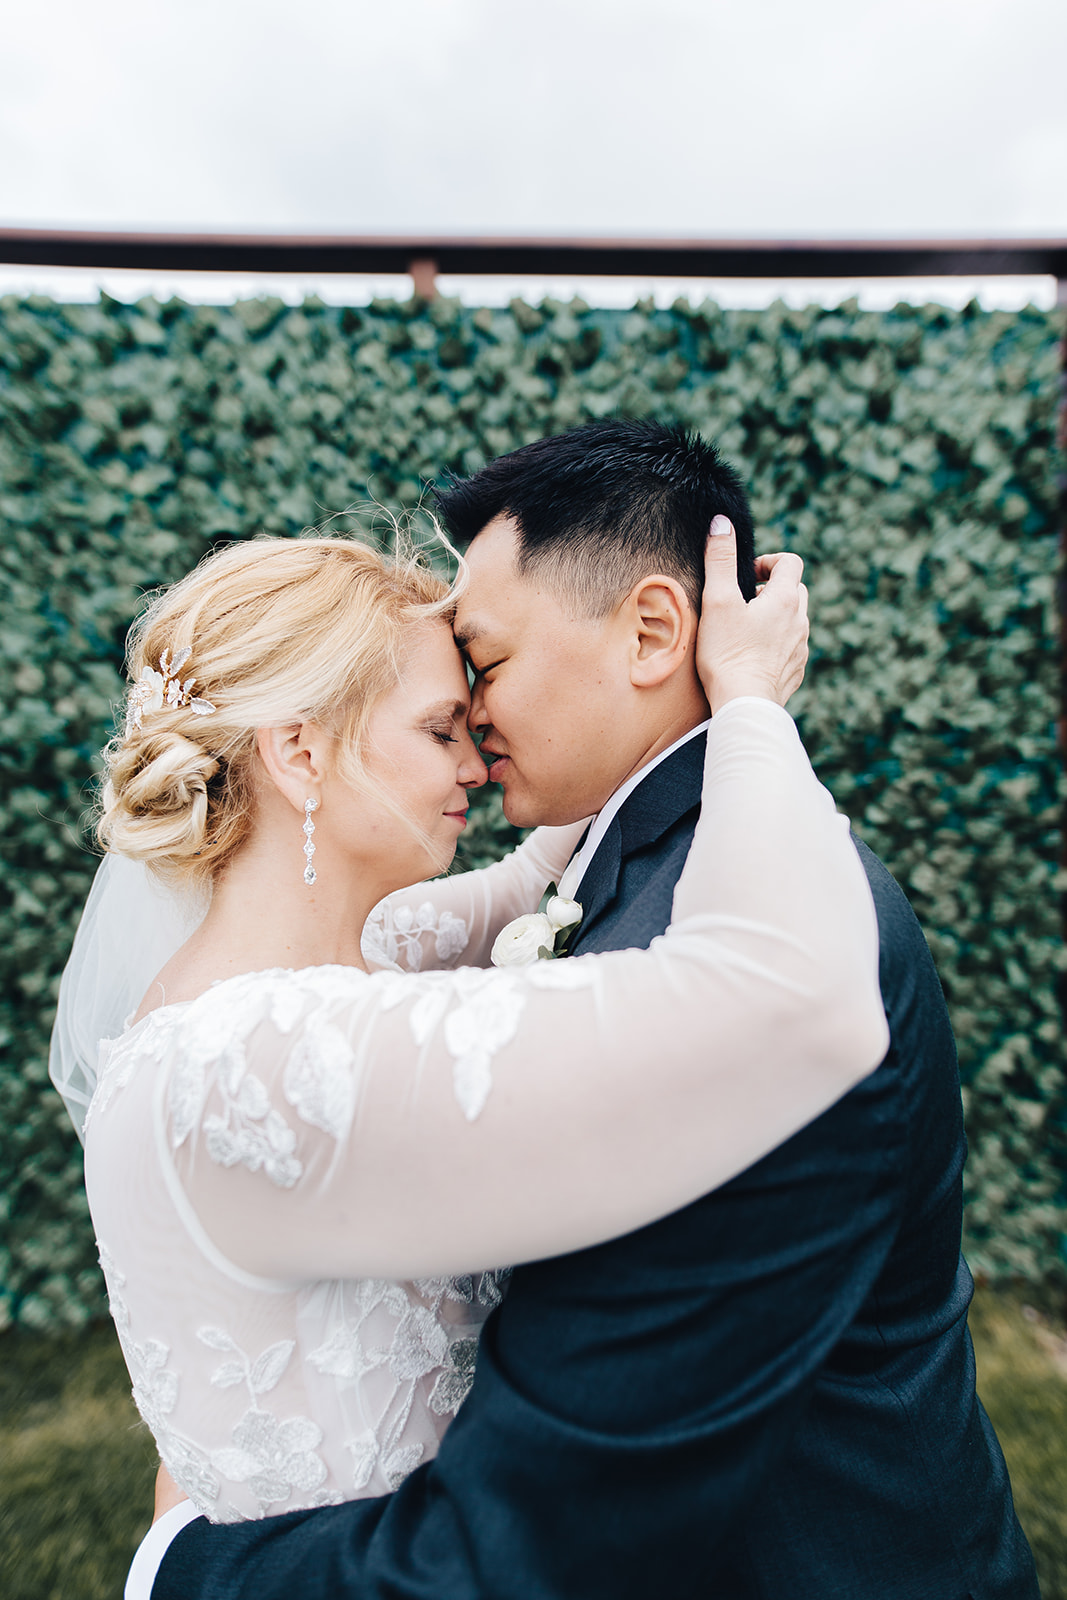 Bride and groom leaning foreheads together